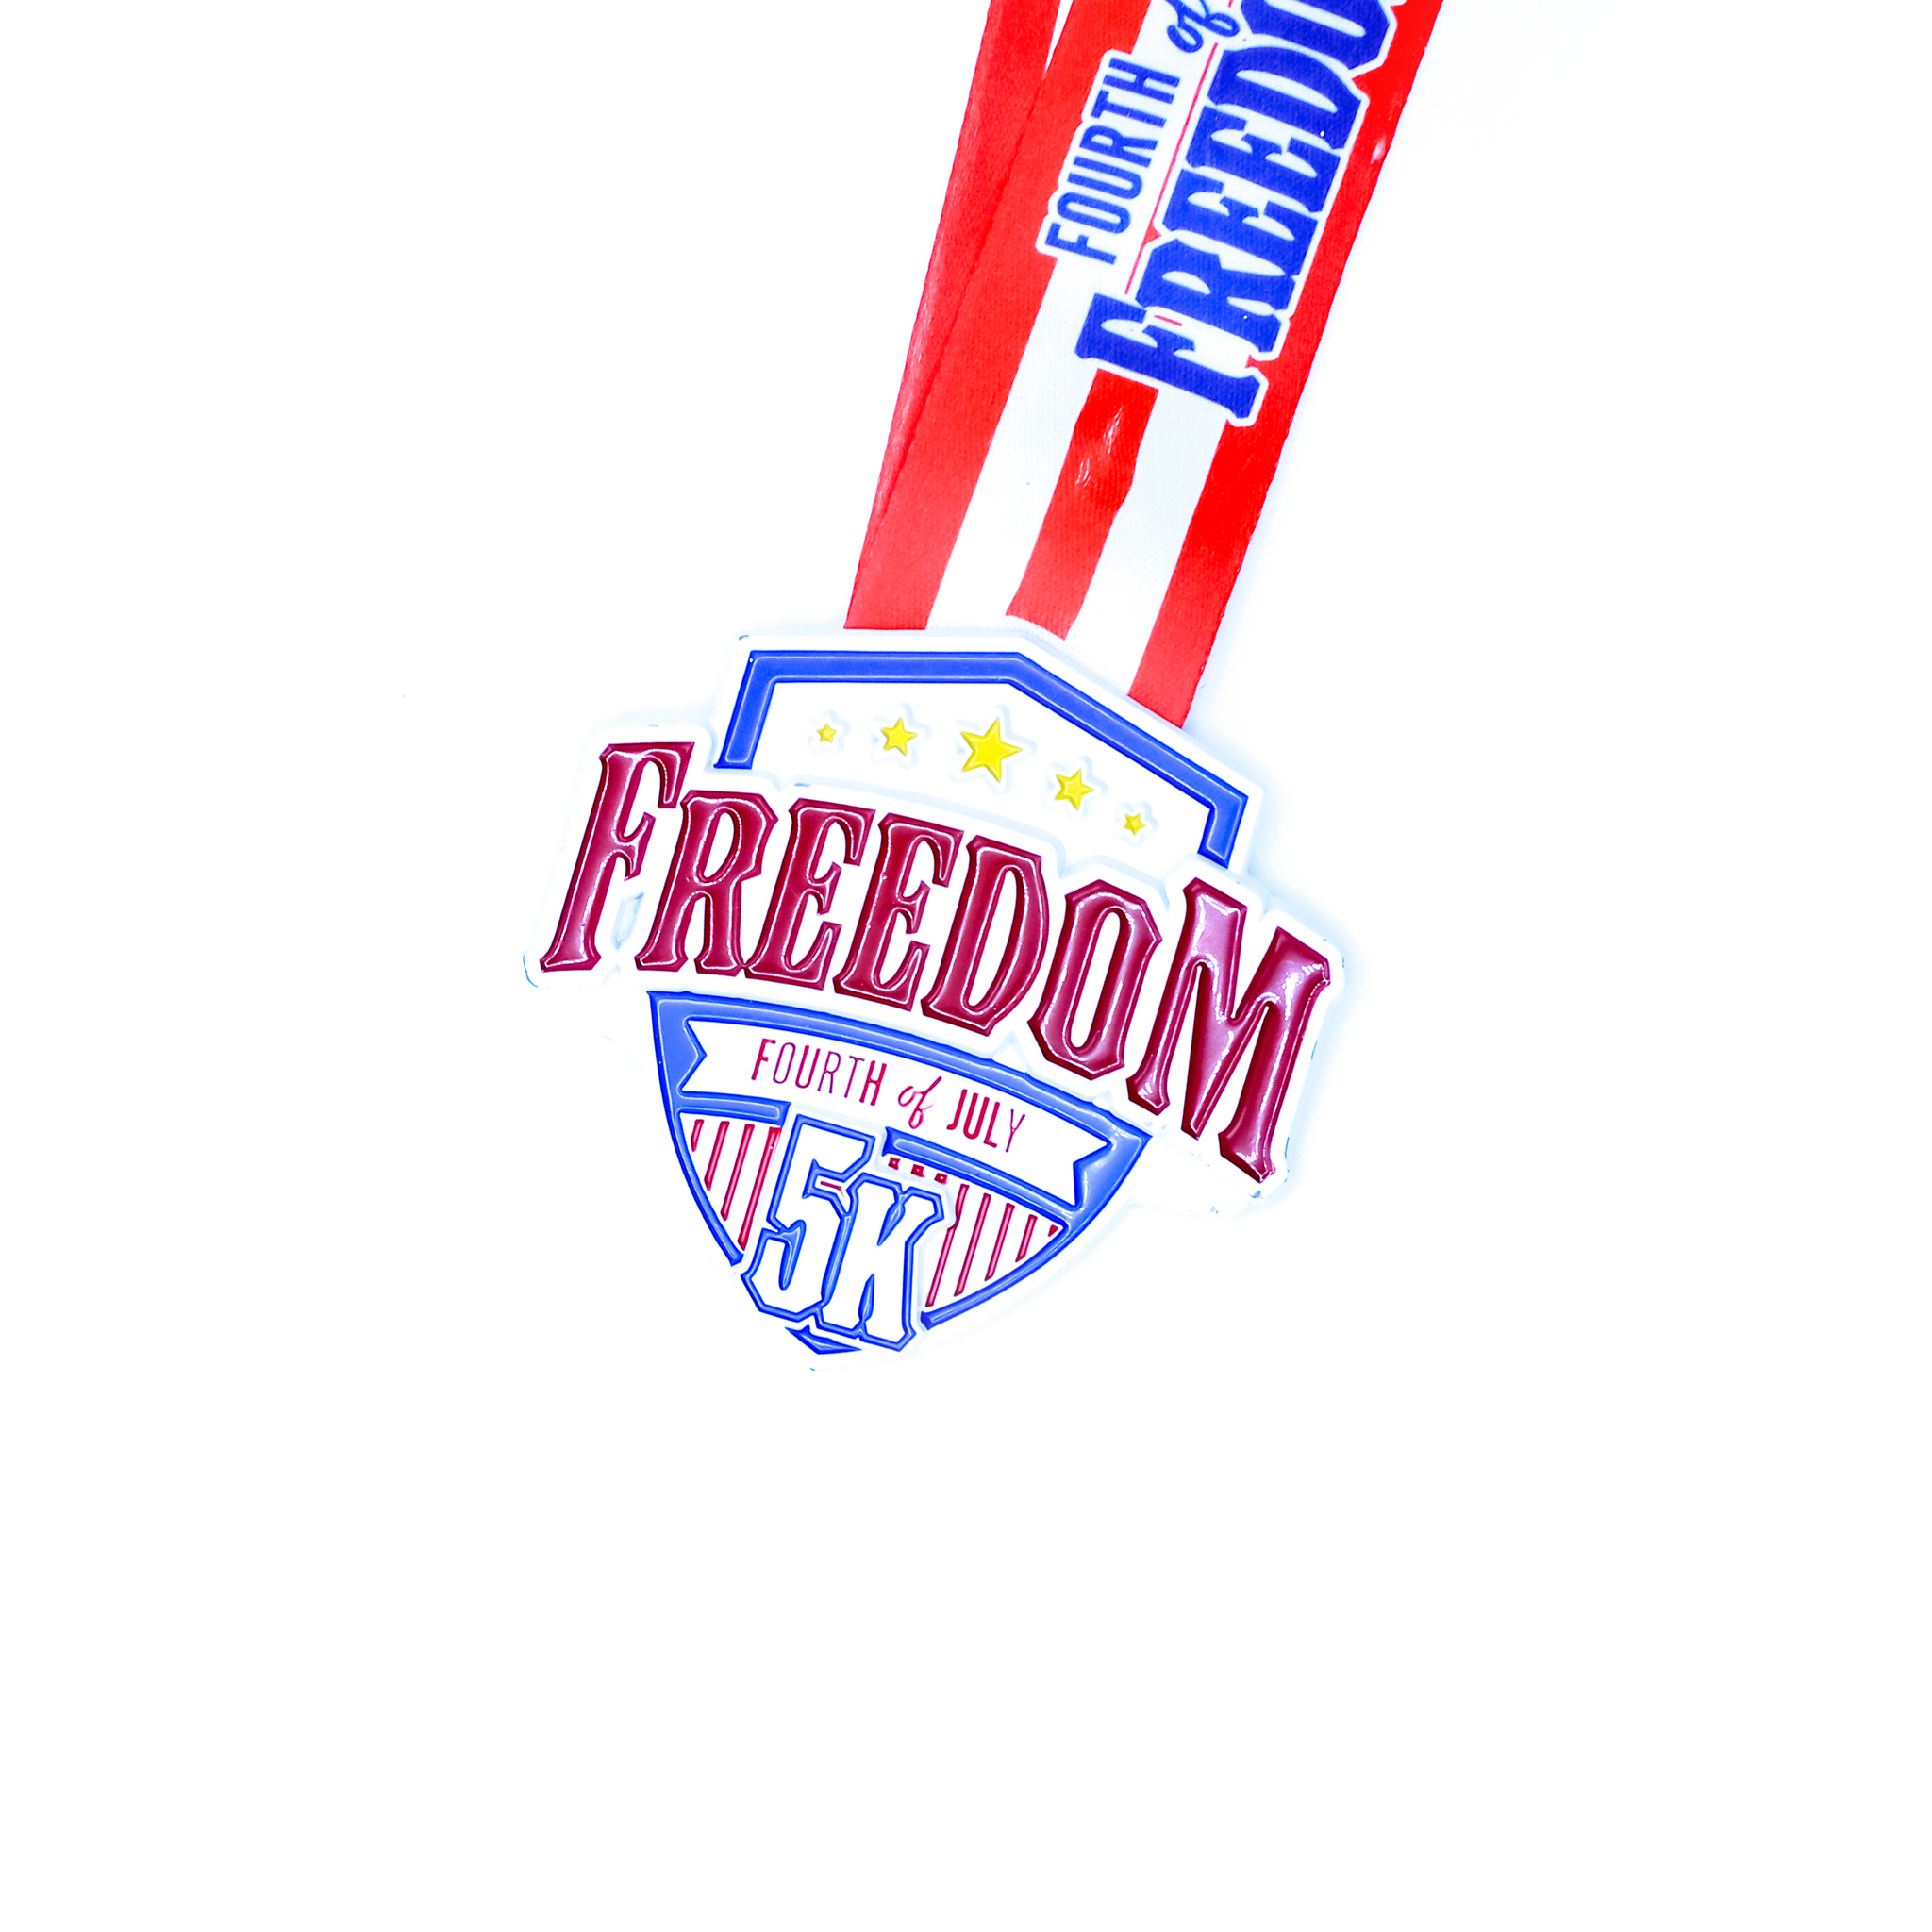 Fourth of July Freedom 5k - Entry + Medal